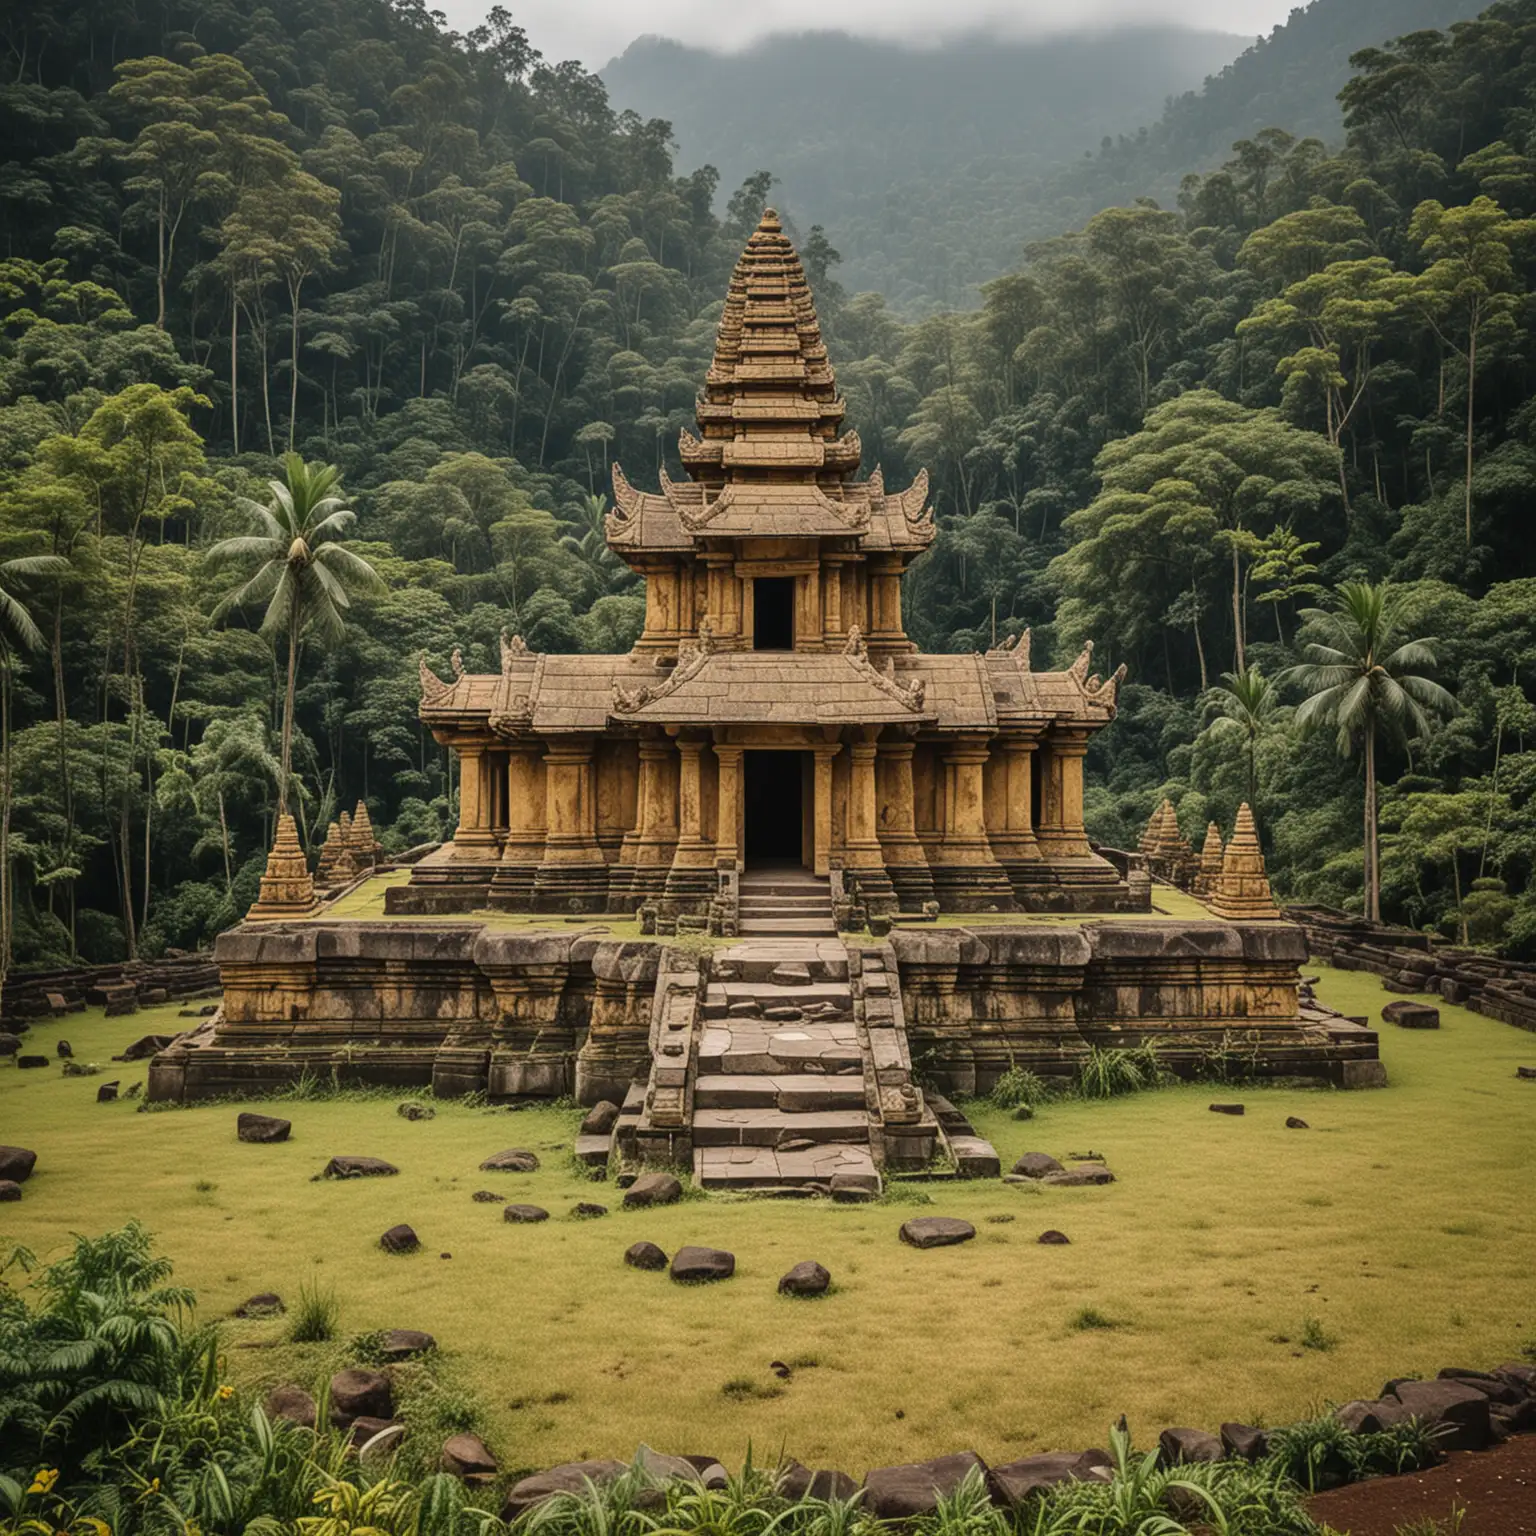 a view of a very large ancient Indonesian yellow stone temple in the middle of the forest at the foot of a mountain, front view